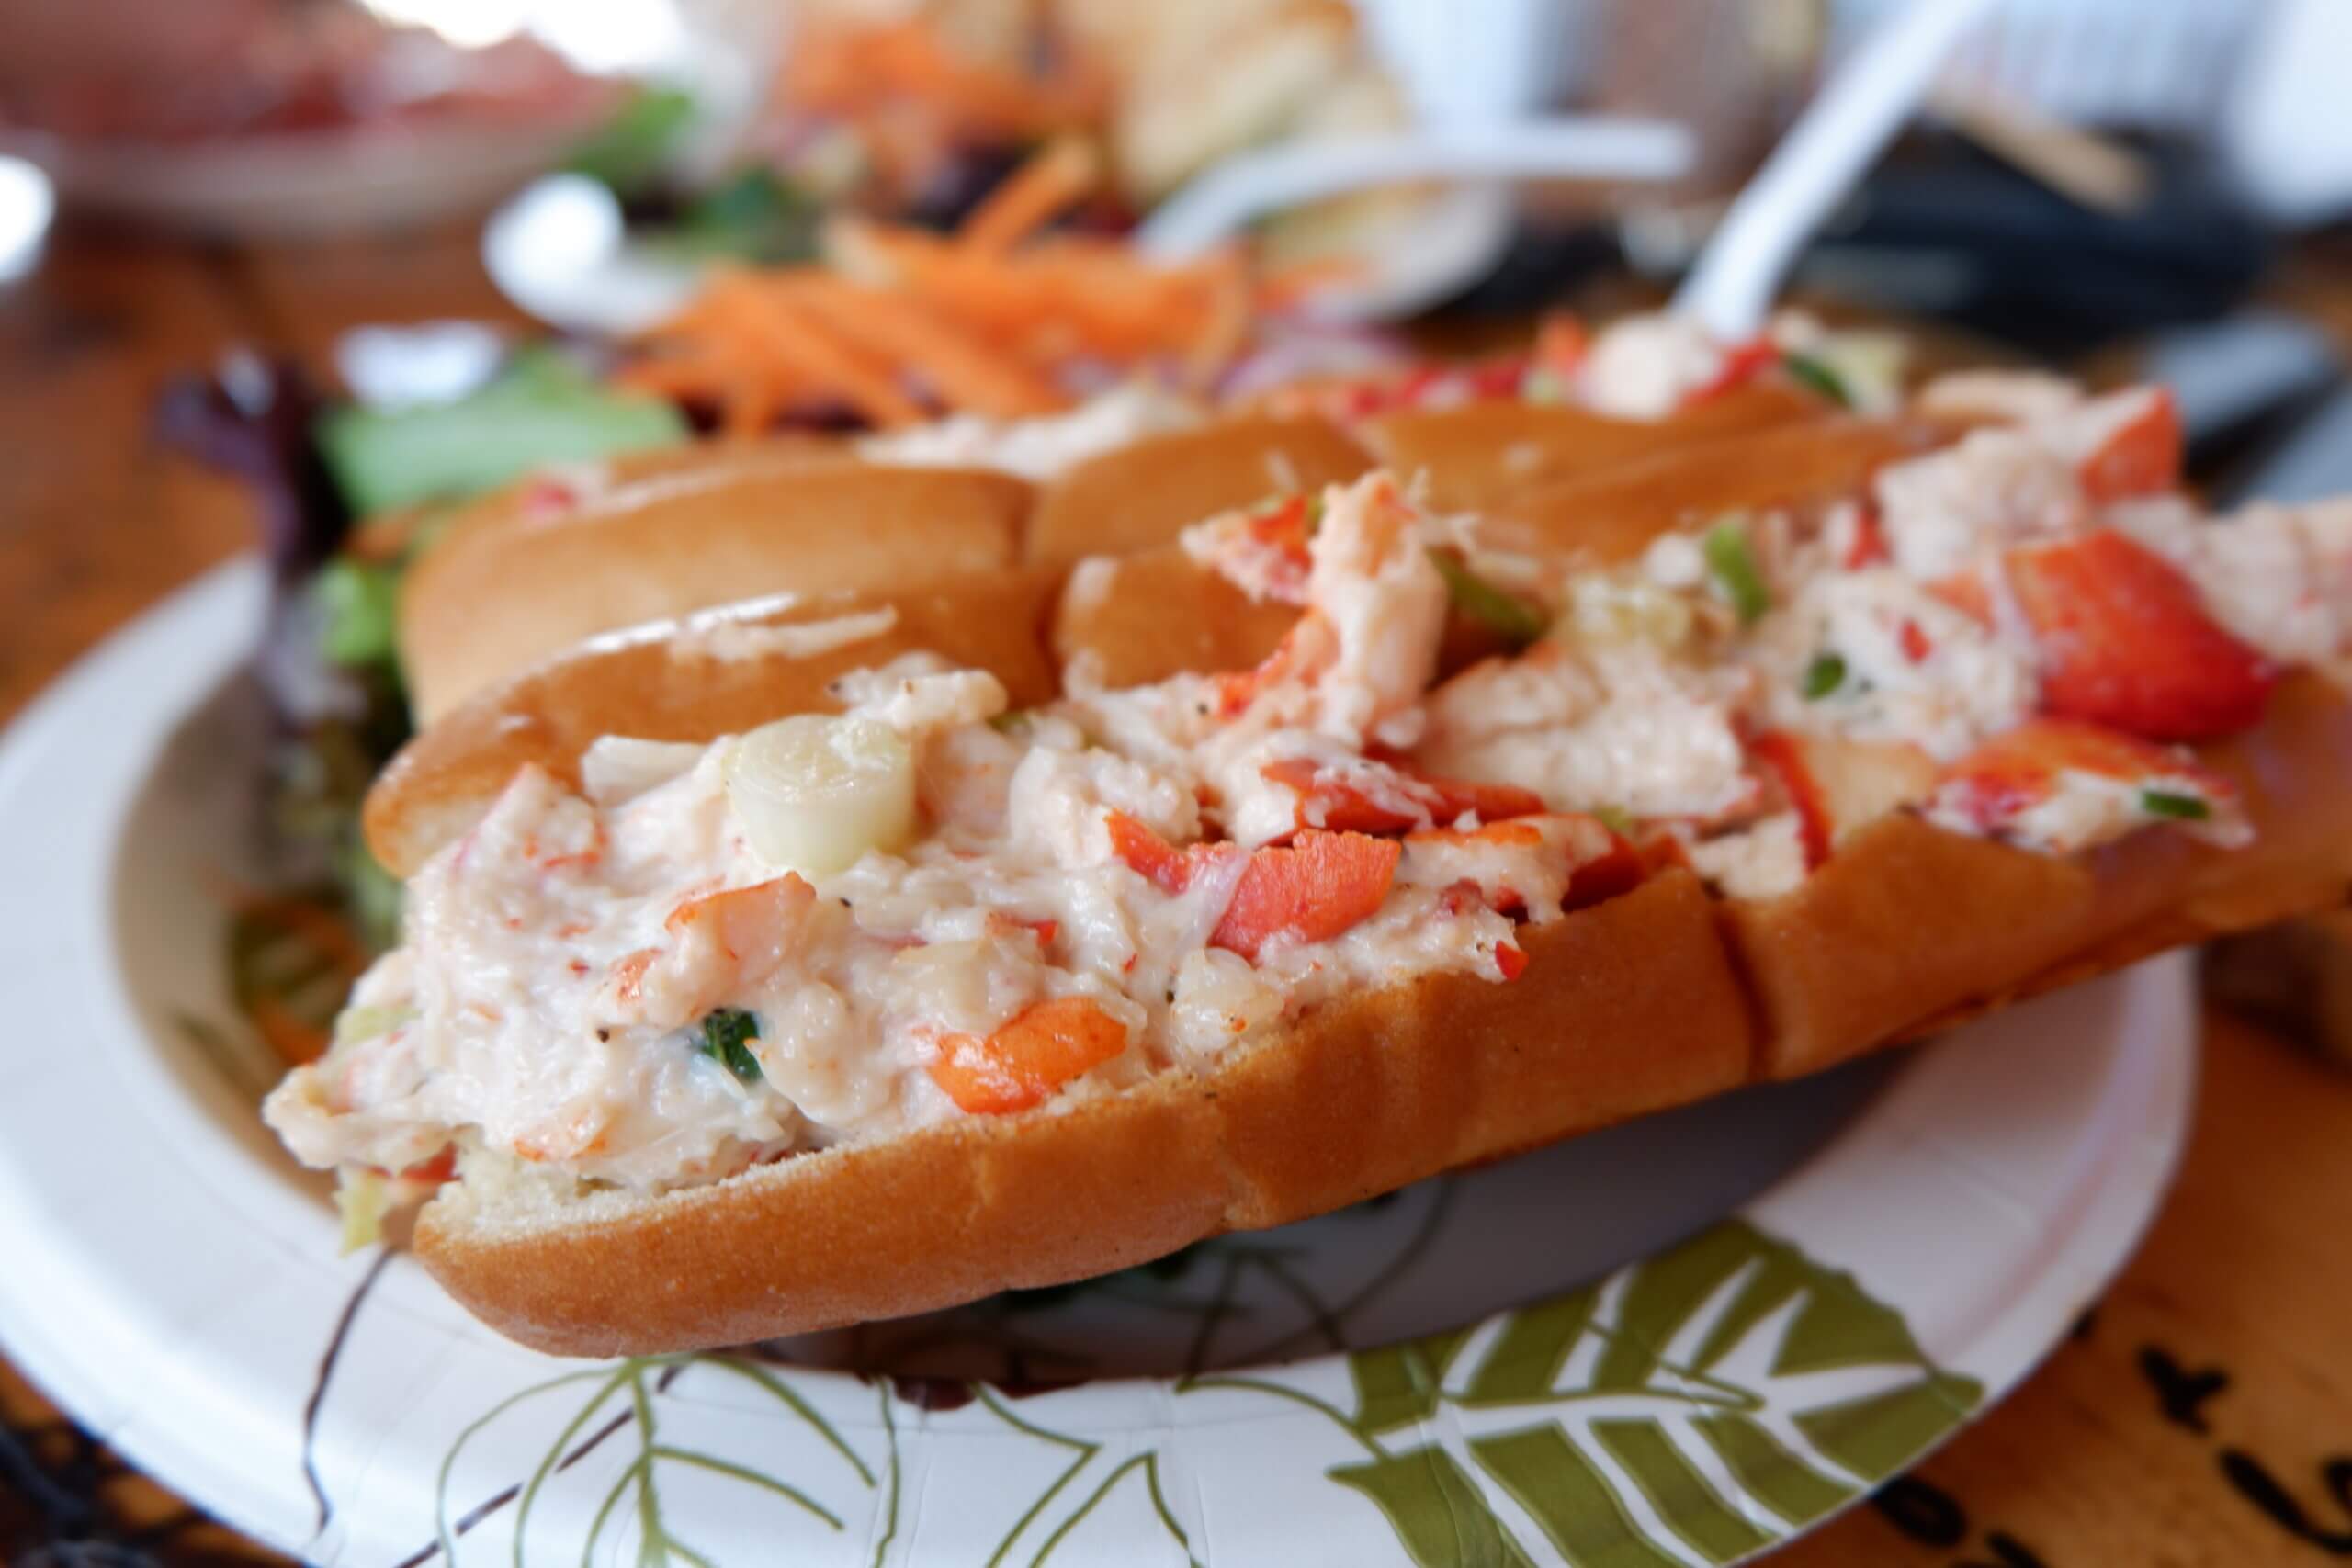 A traditional lobster roll on a hot dog bun in New Brunswick.